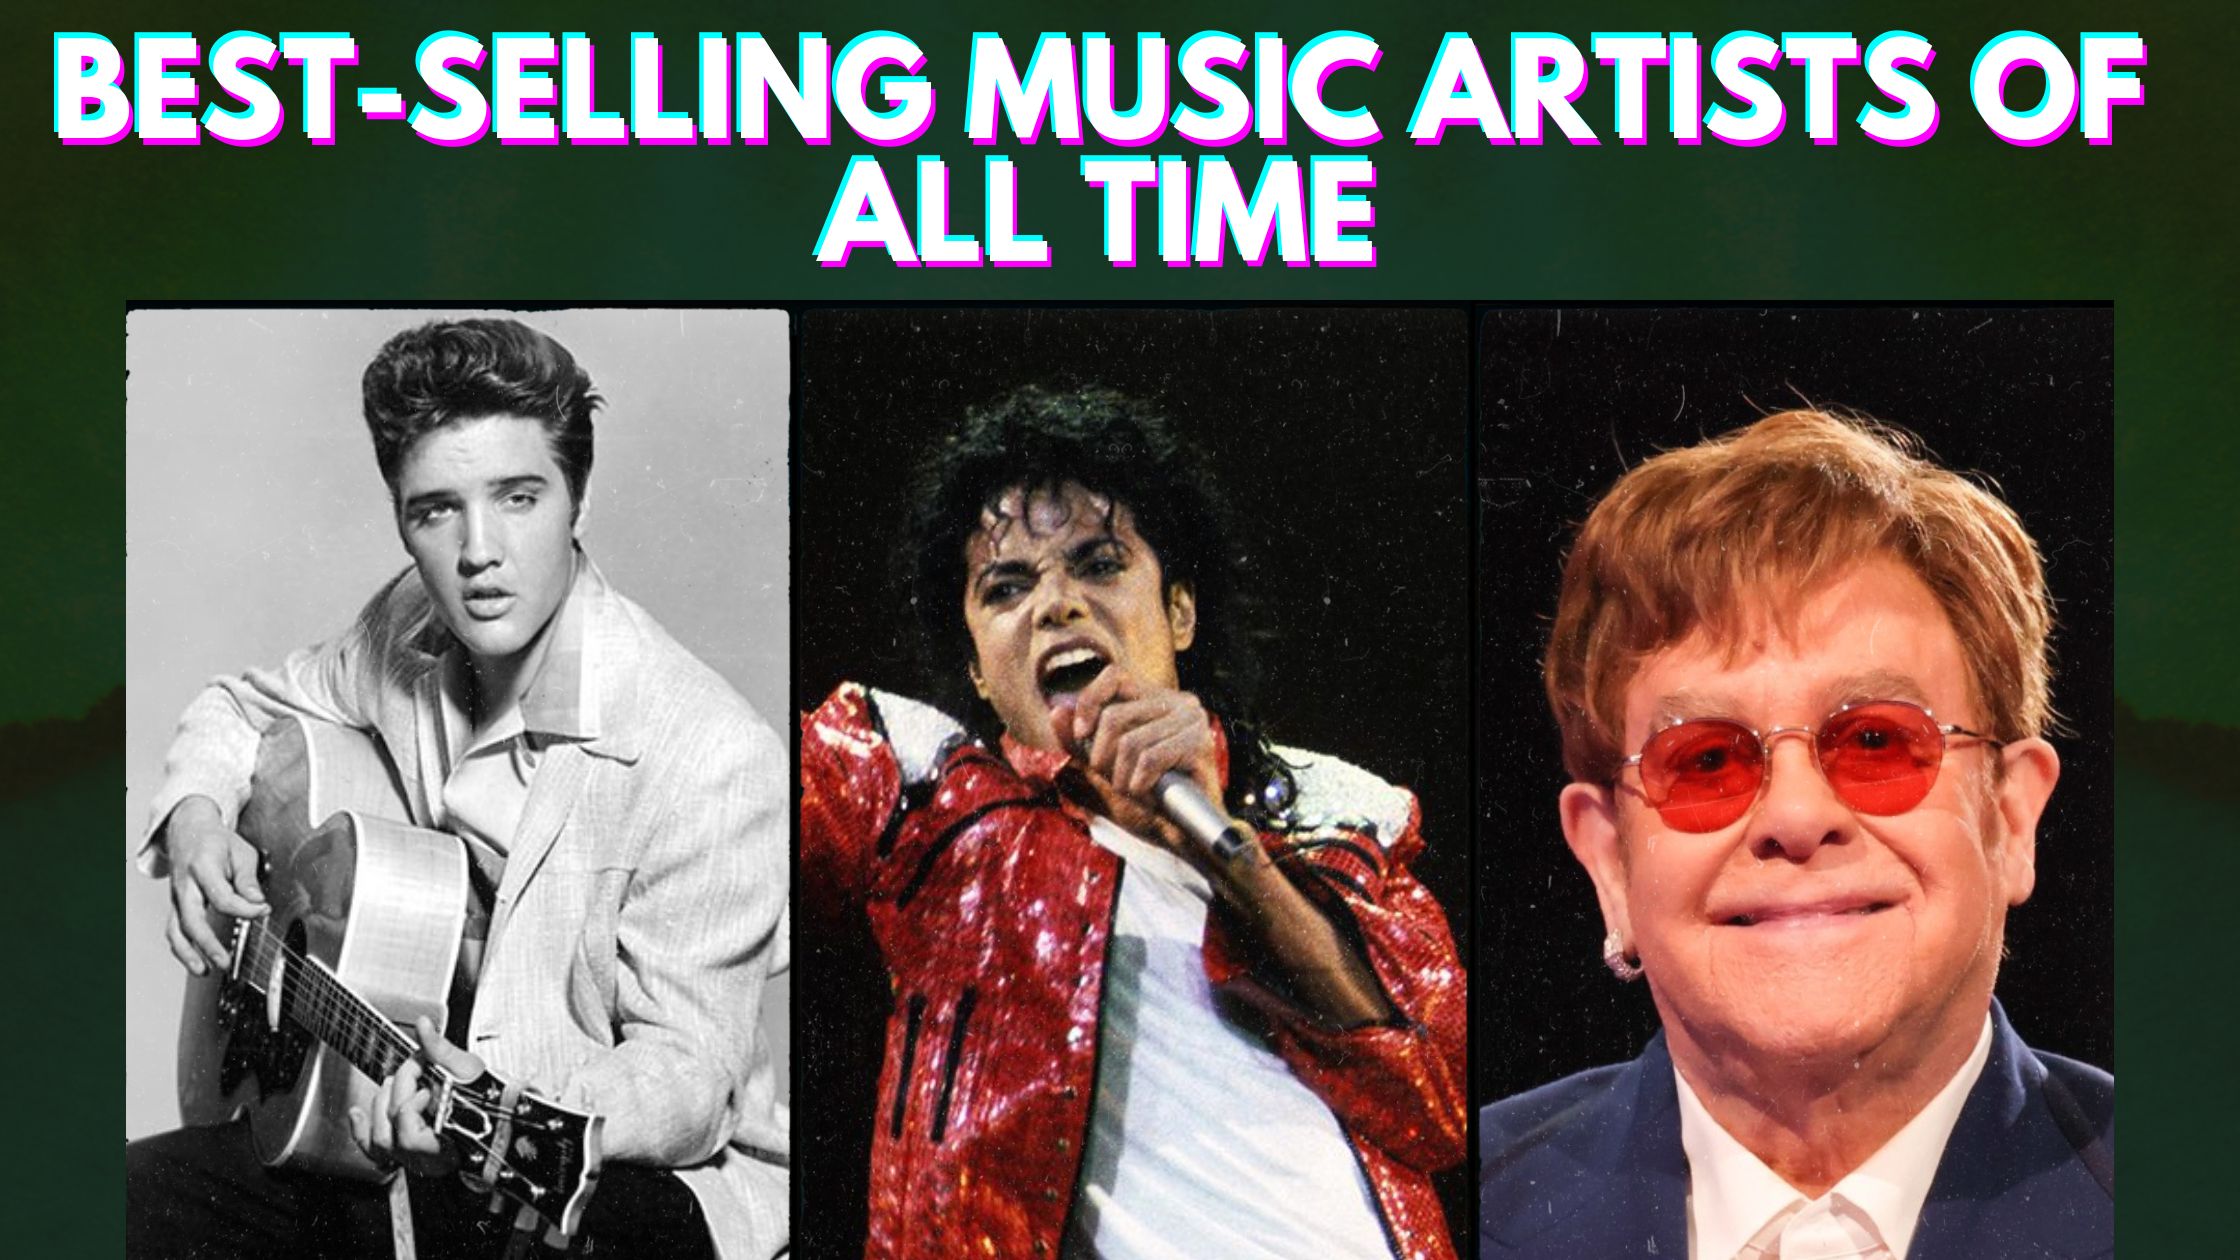 Bestselling Music Artists of all time (Top 10)